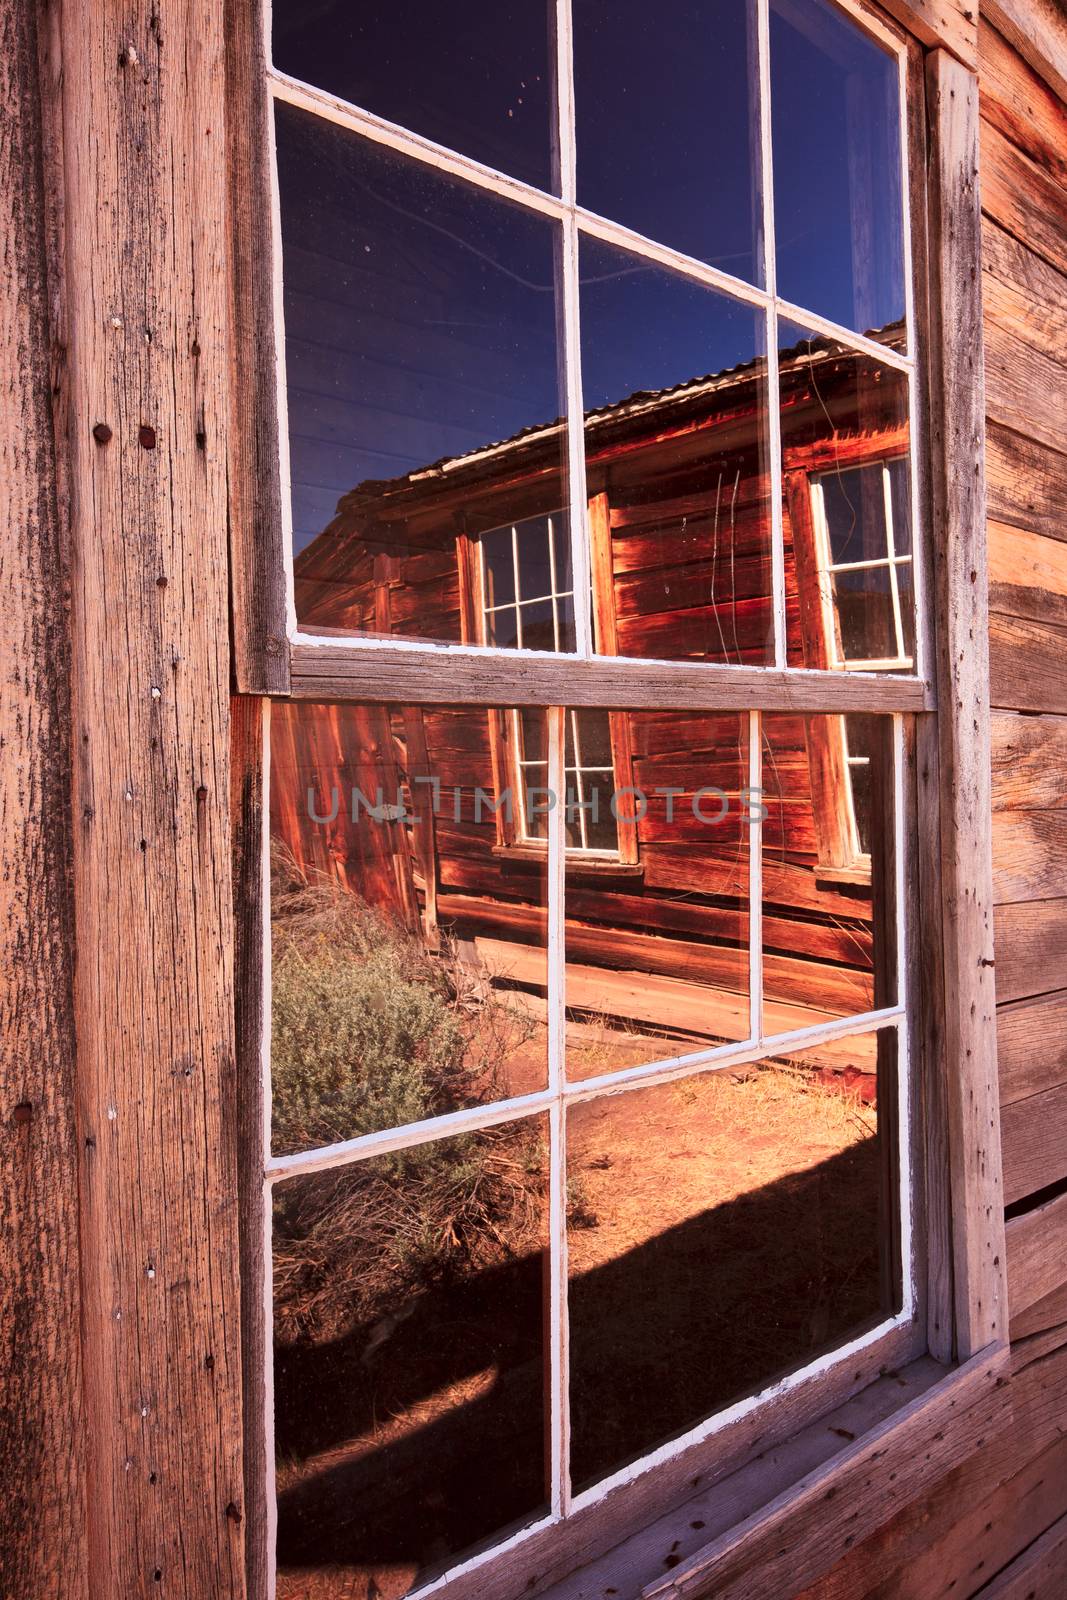 Bodie is a historic ghostown by highway 395 in the Eastern Sierras.